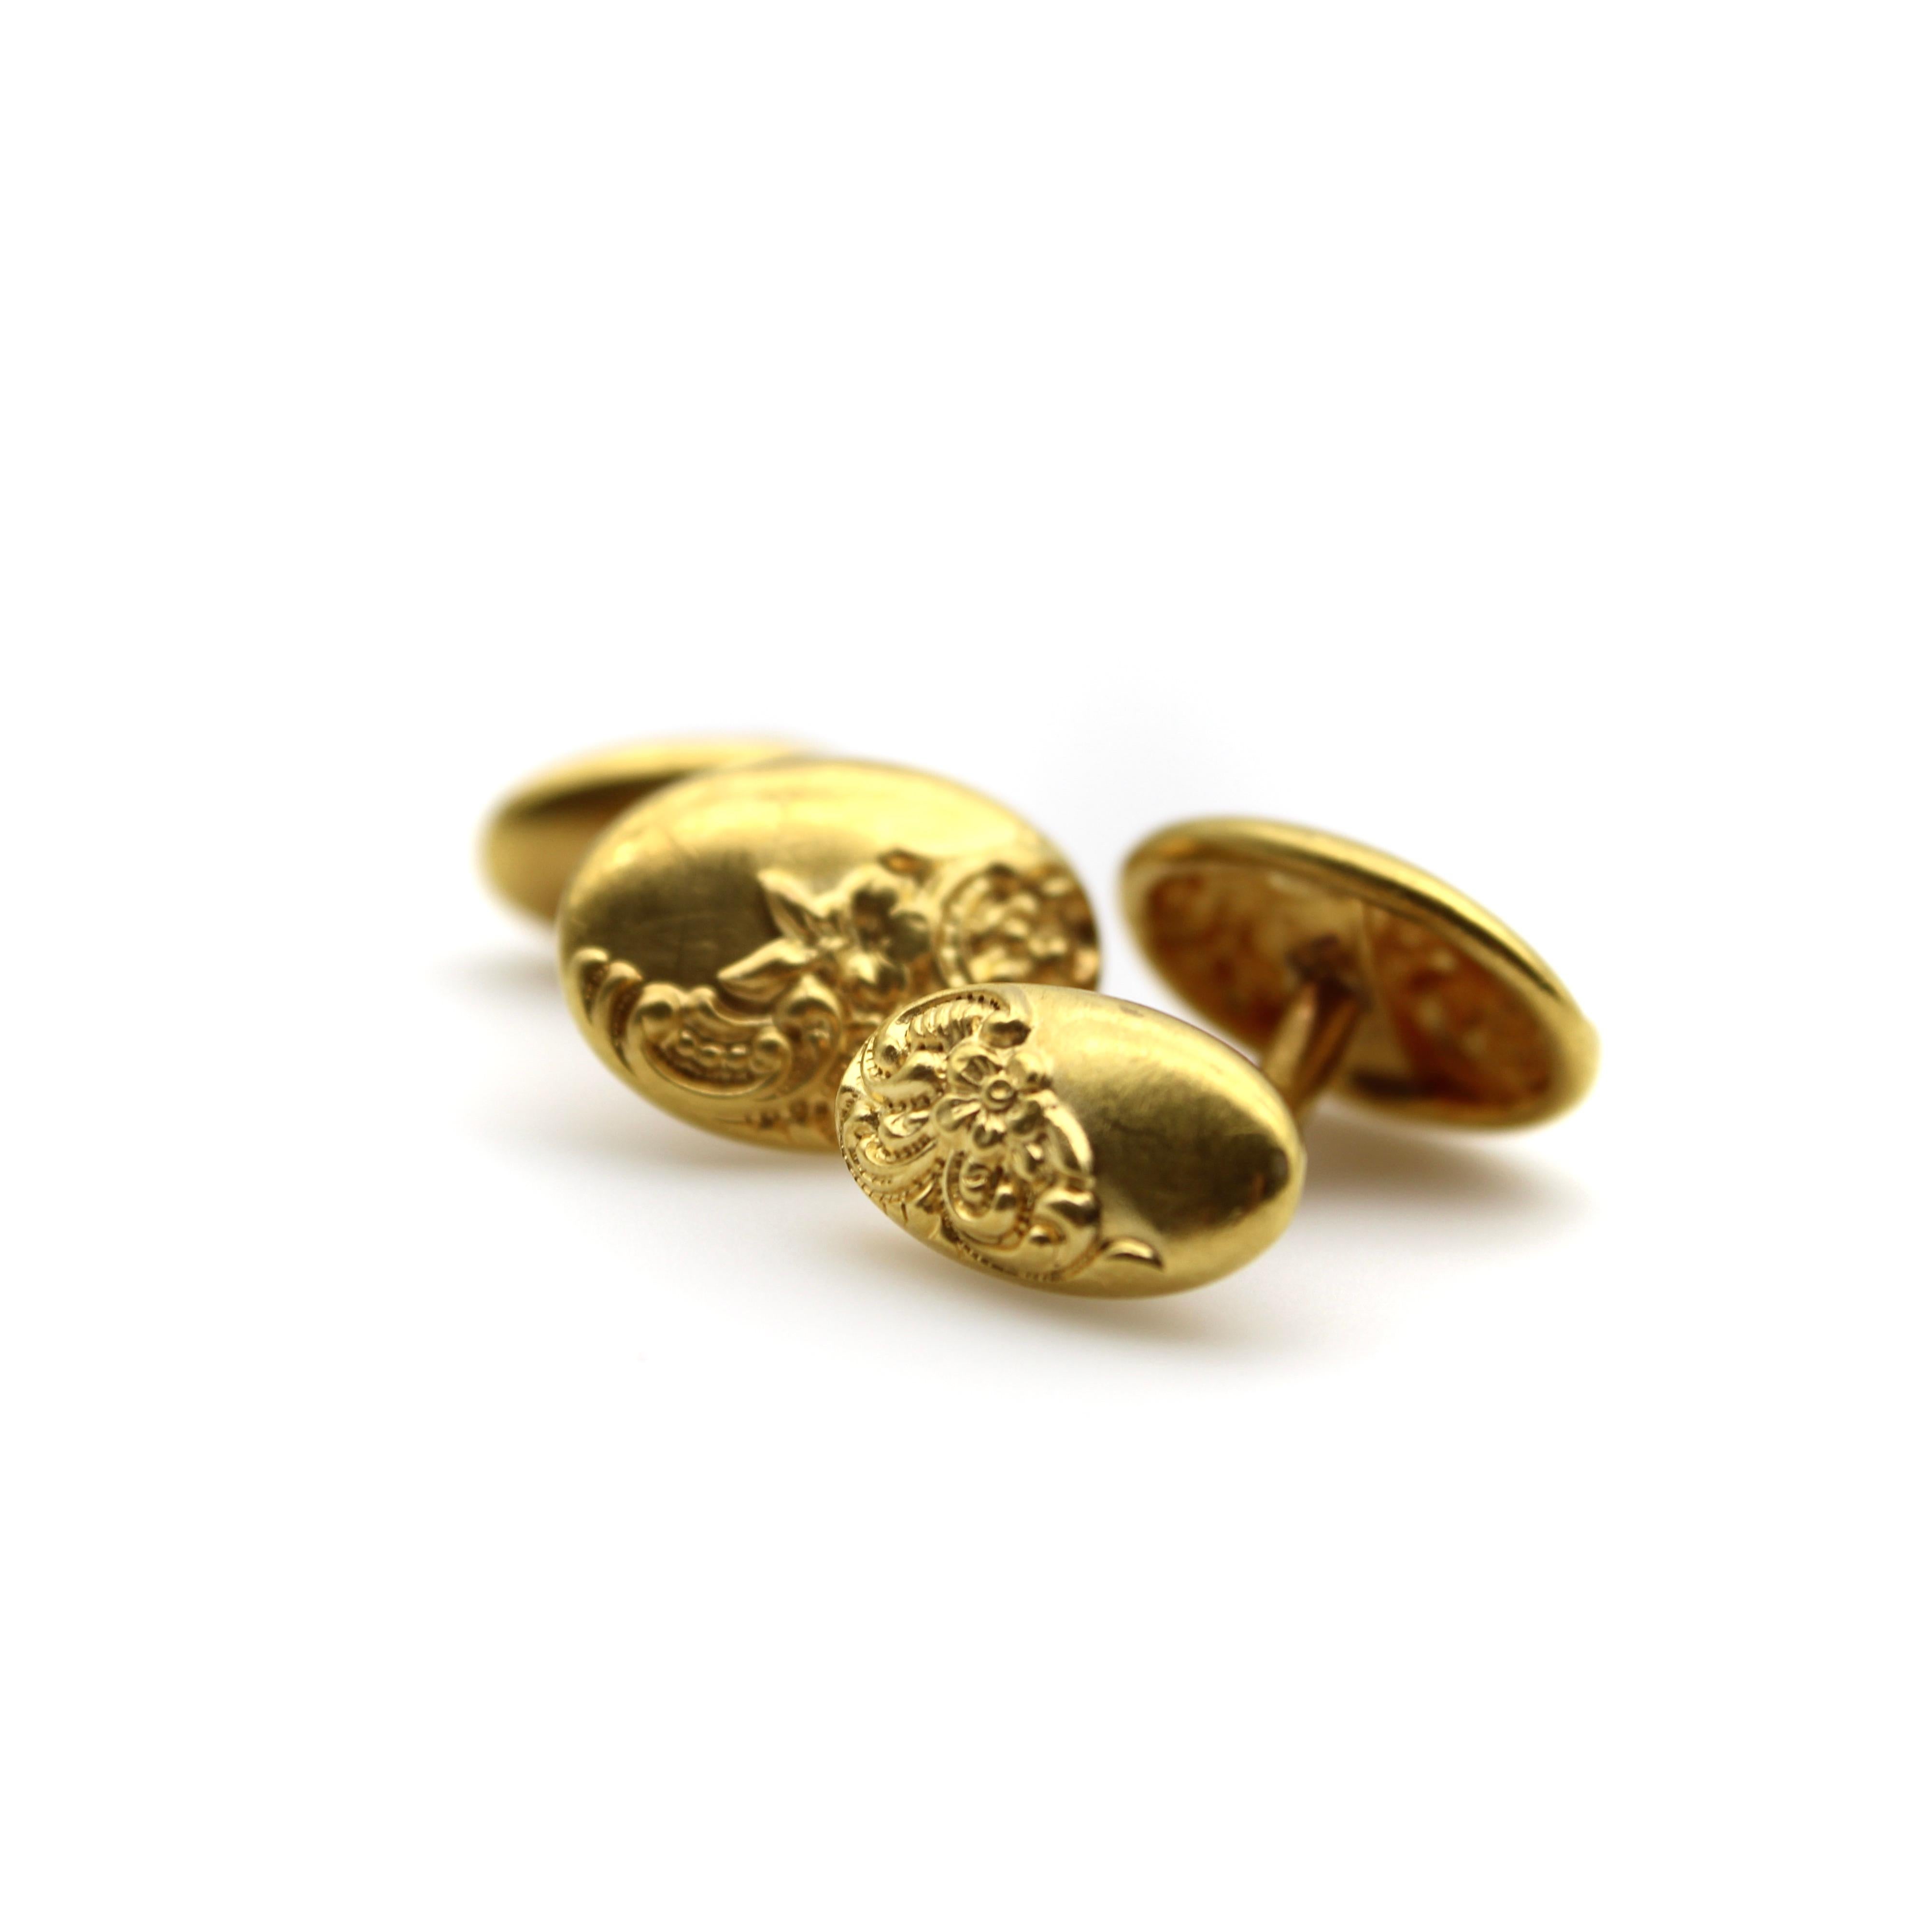 These Victorian cufflinks are graceful and elegant; a repousse design covers the oval shapes with a sweeping floral pattern halfway across the links, while the other half is a beautiful matte surface. The cufflinks are 14k gold, but are bloomed in